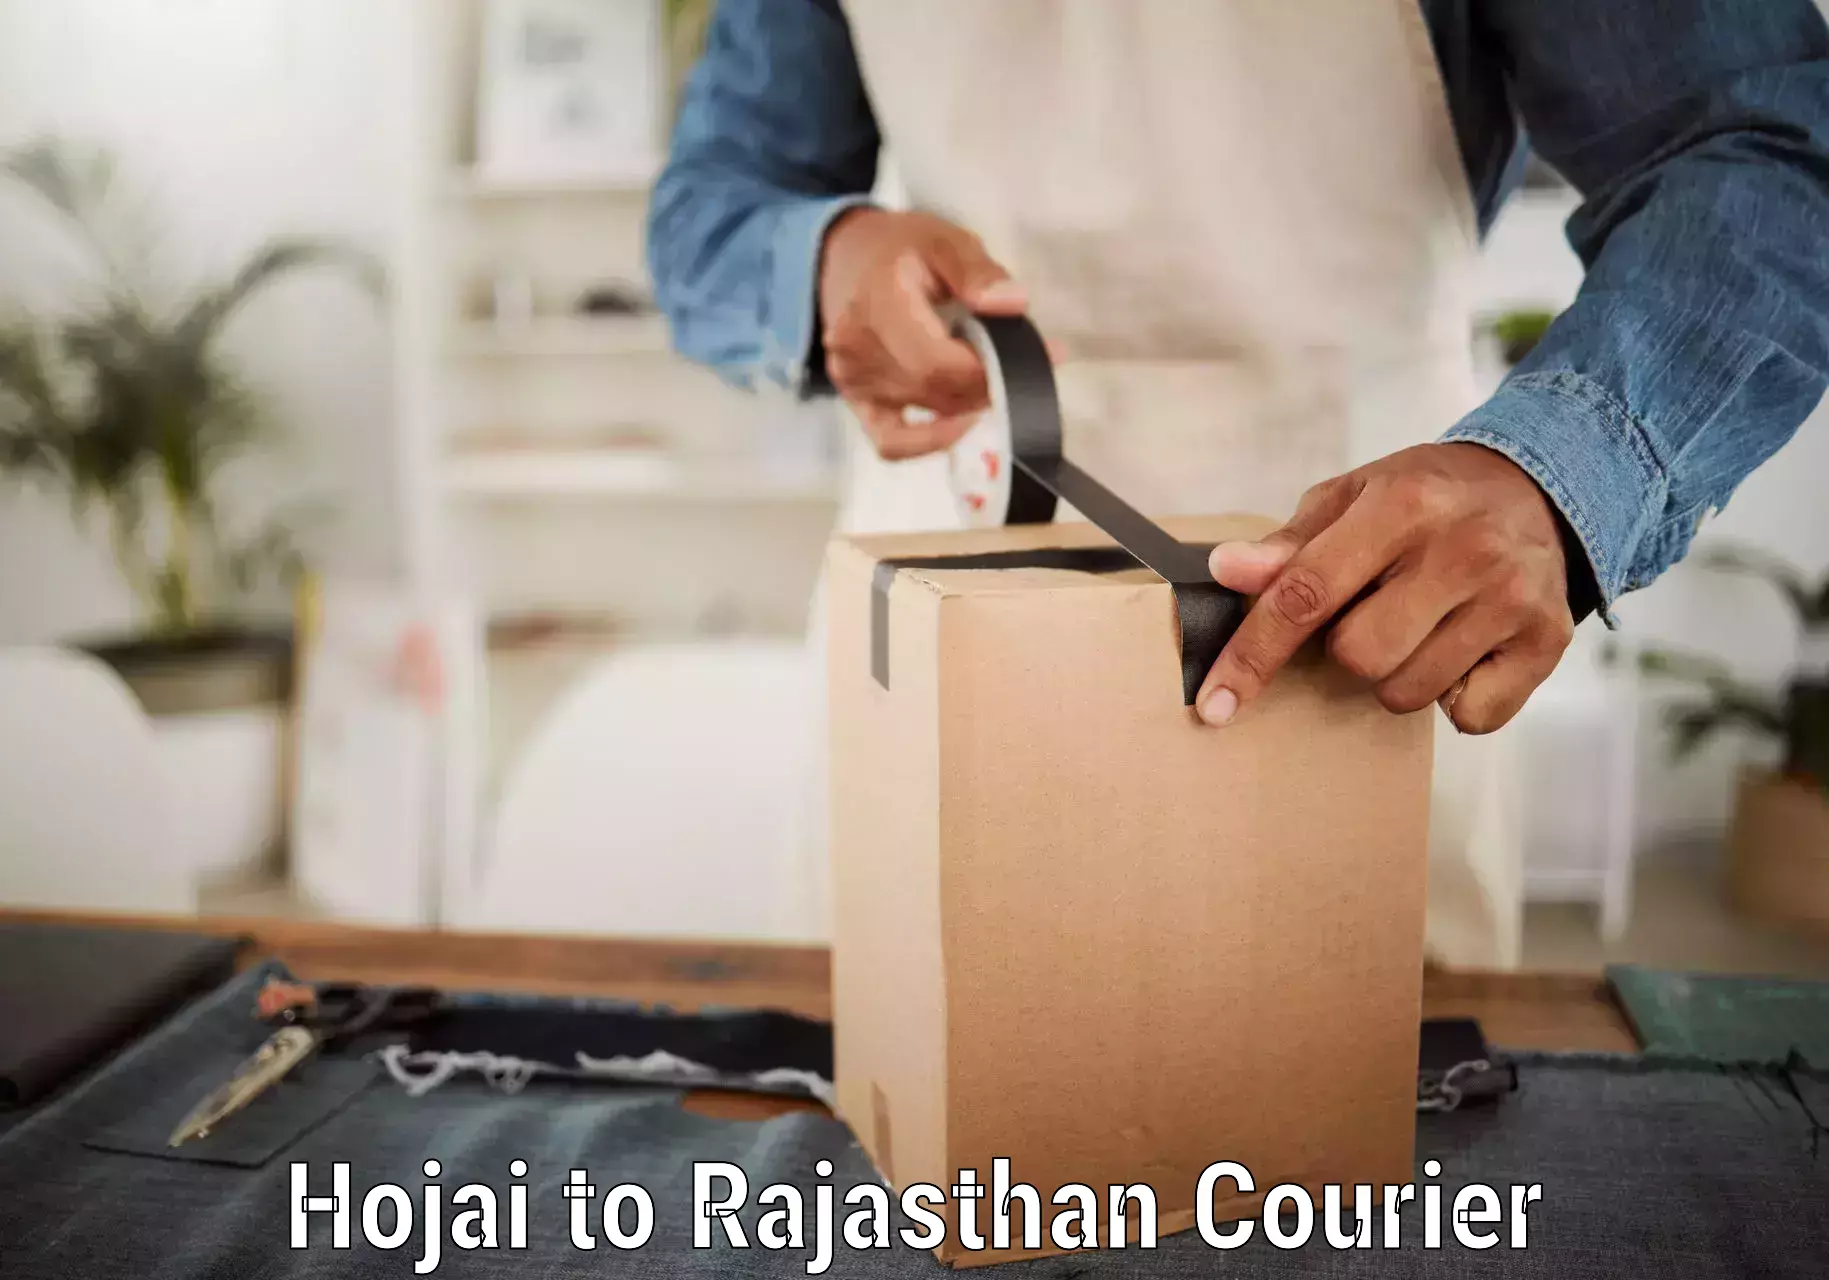 Delivery service partnership Hojai to Rajasthan